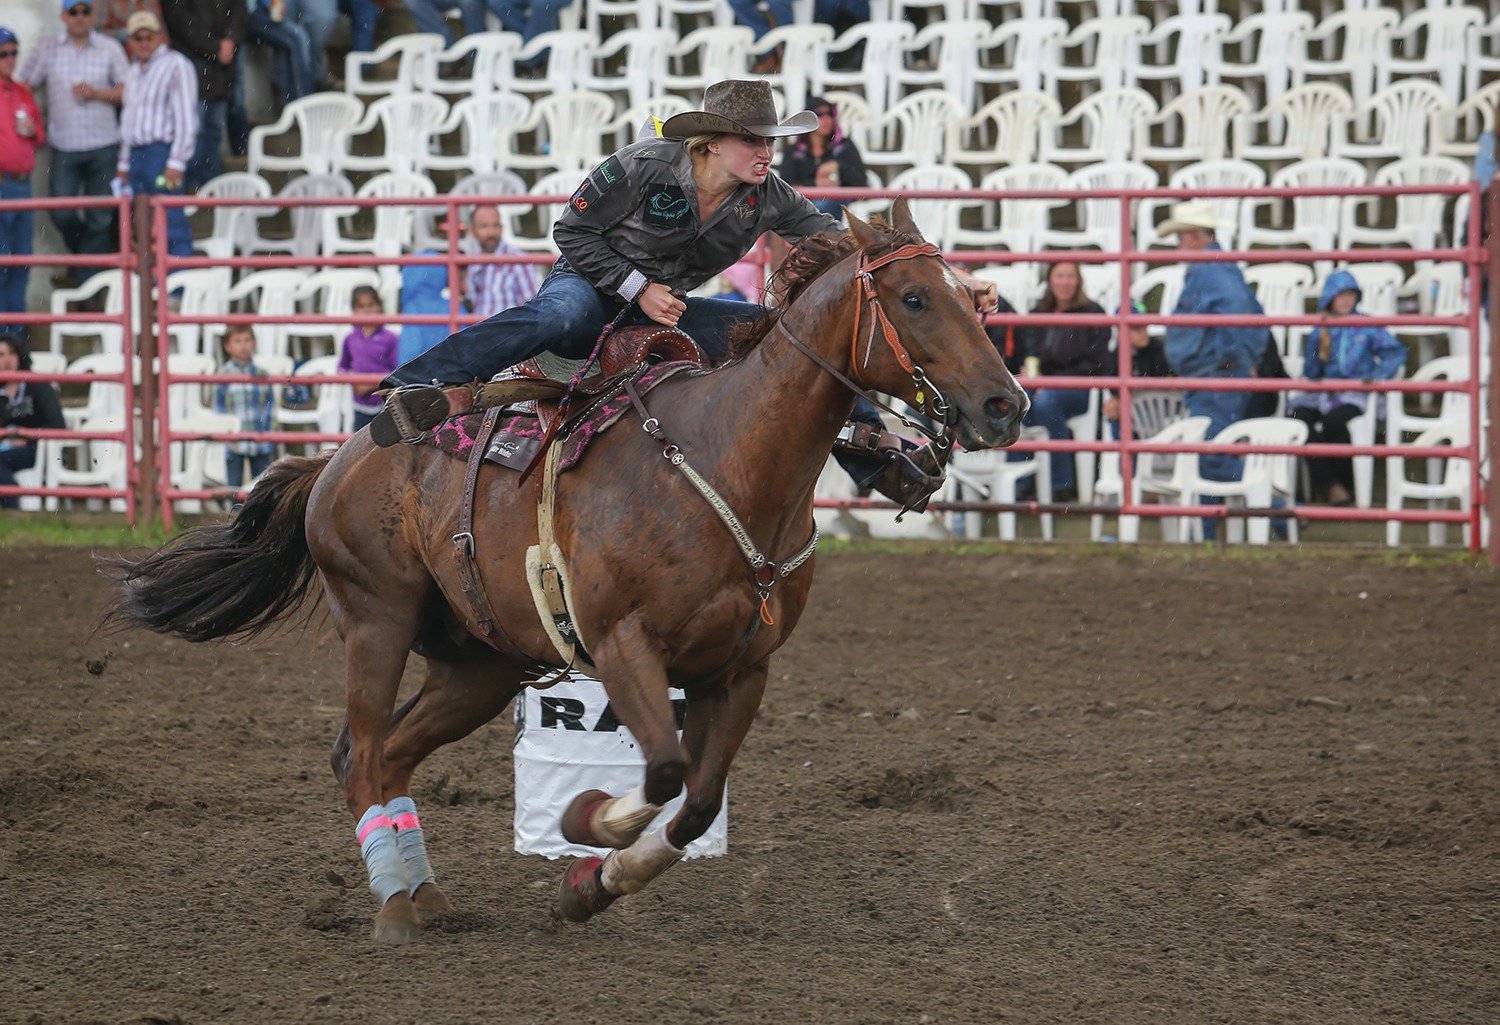 MULTI-TALENTED - Red Deerian Sydney Daines made a run with her horse Flame during the Innisfail Pro Rodeo at the Daines Rodeo Grounds near Innisfail last June. Daines is one of three local athletes competing at the Canadian Finals Rodeo in Edmonton this year. She is also a key player for the University of Alberta Pandas soccer squad.